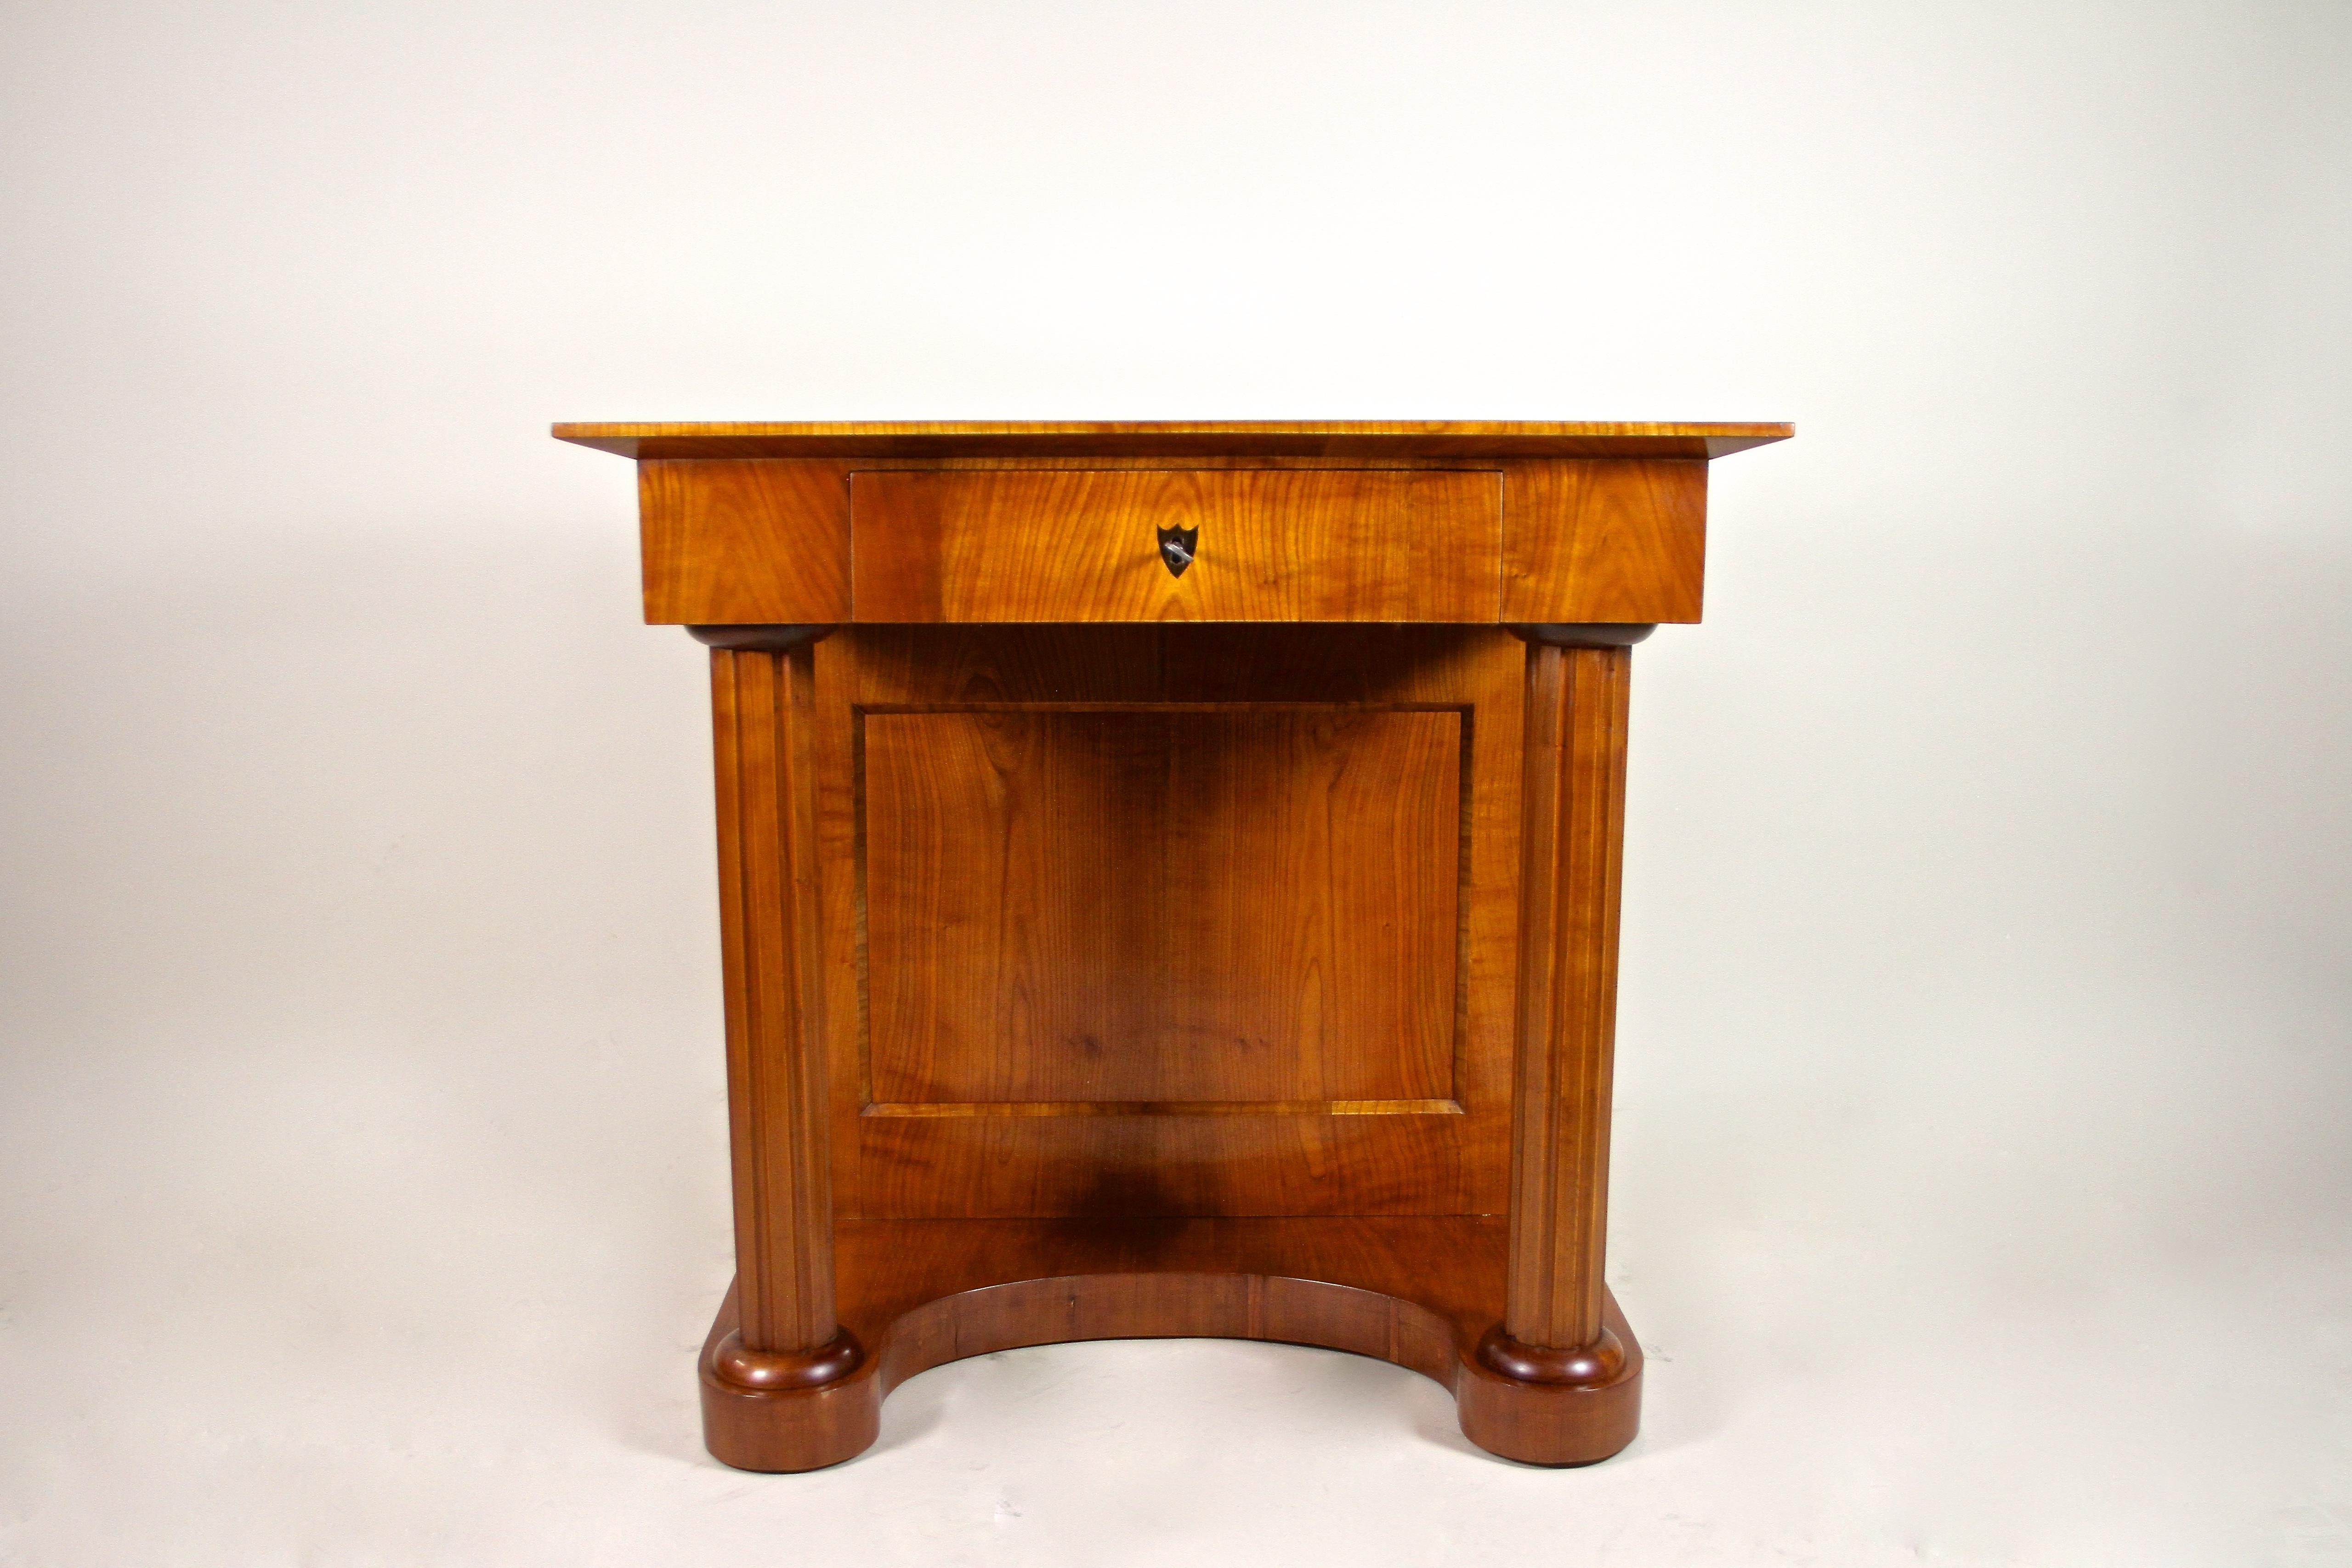 Very appealing mid 19th century cherrywood Console Table from the second Biedermeier period around 1860 in Austria. Veneered in fine cherrywood this perfect restored Biedermeier console impresses with graceful curves and exceptional lines. Wonderful